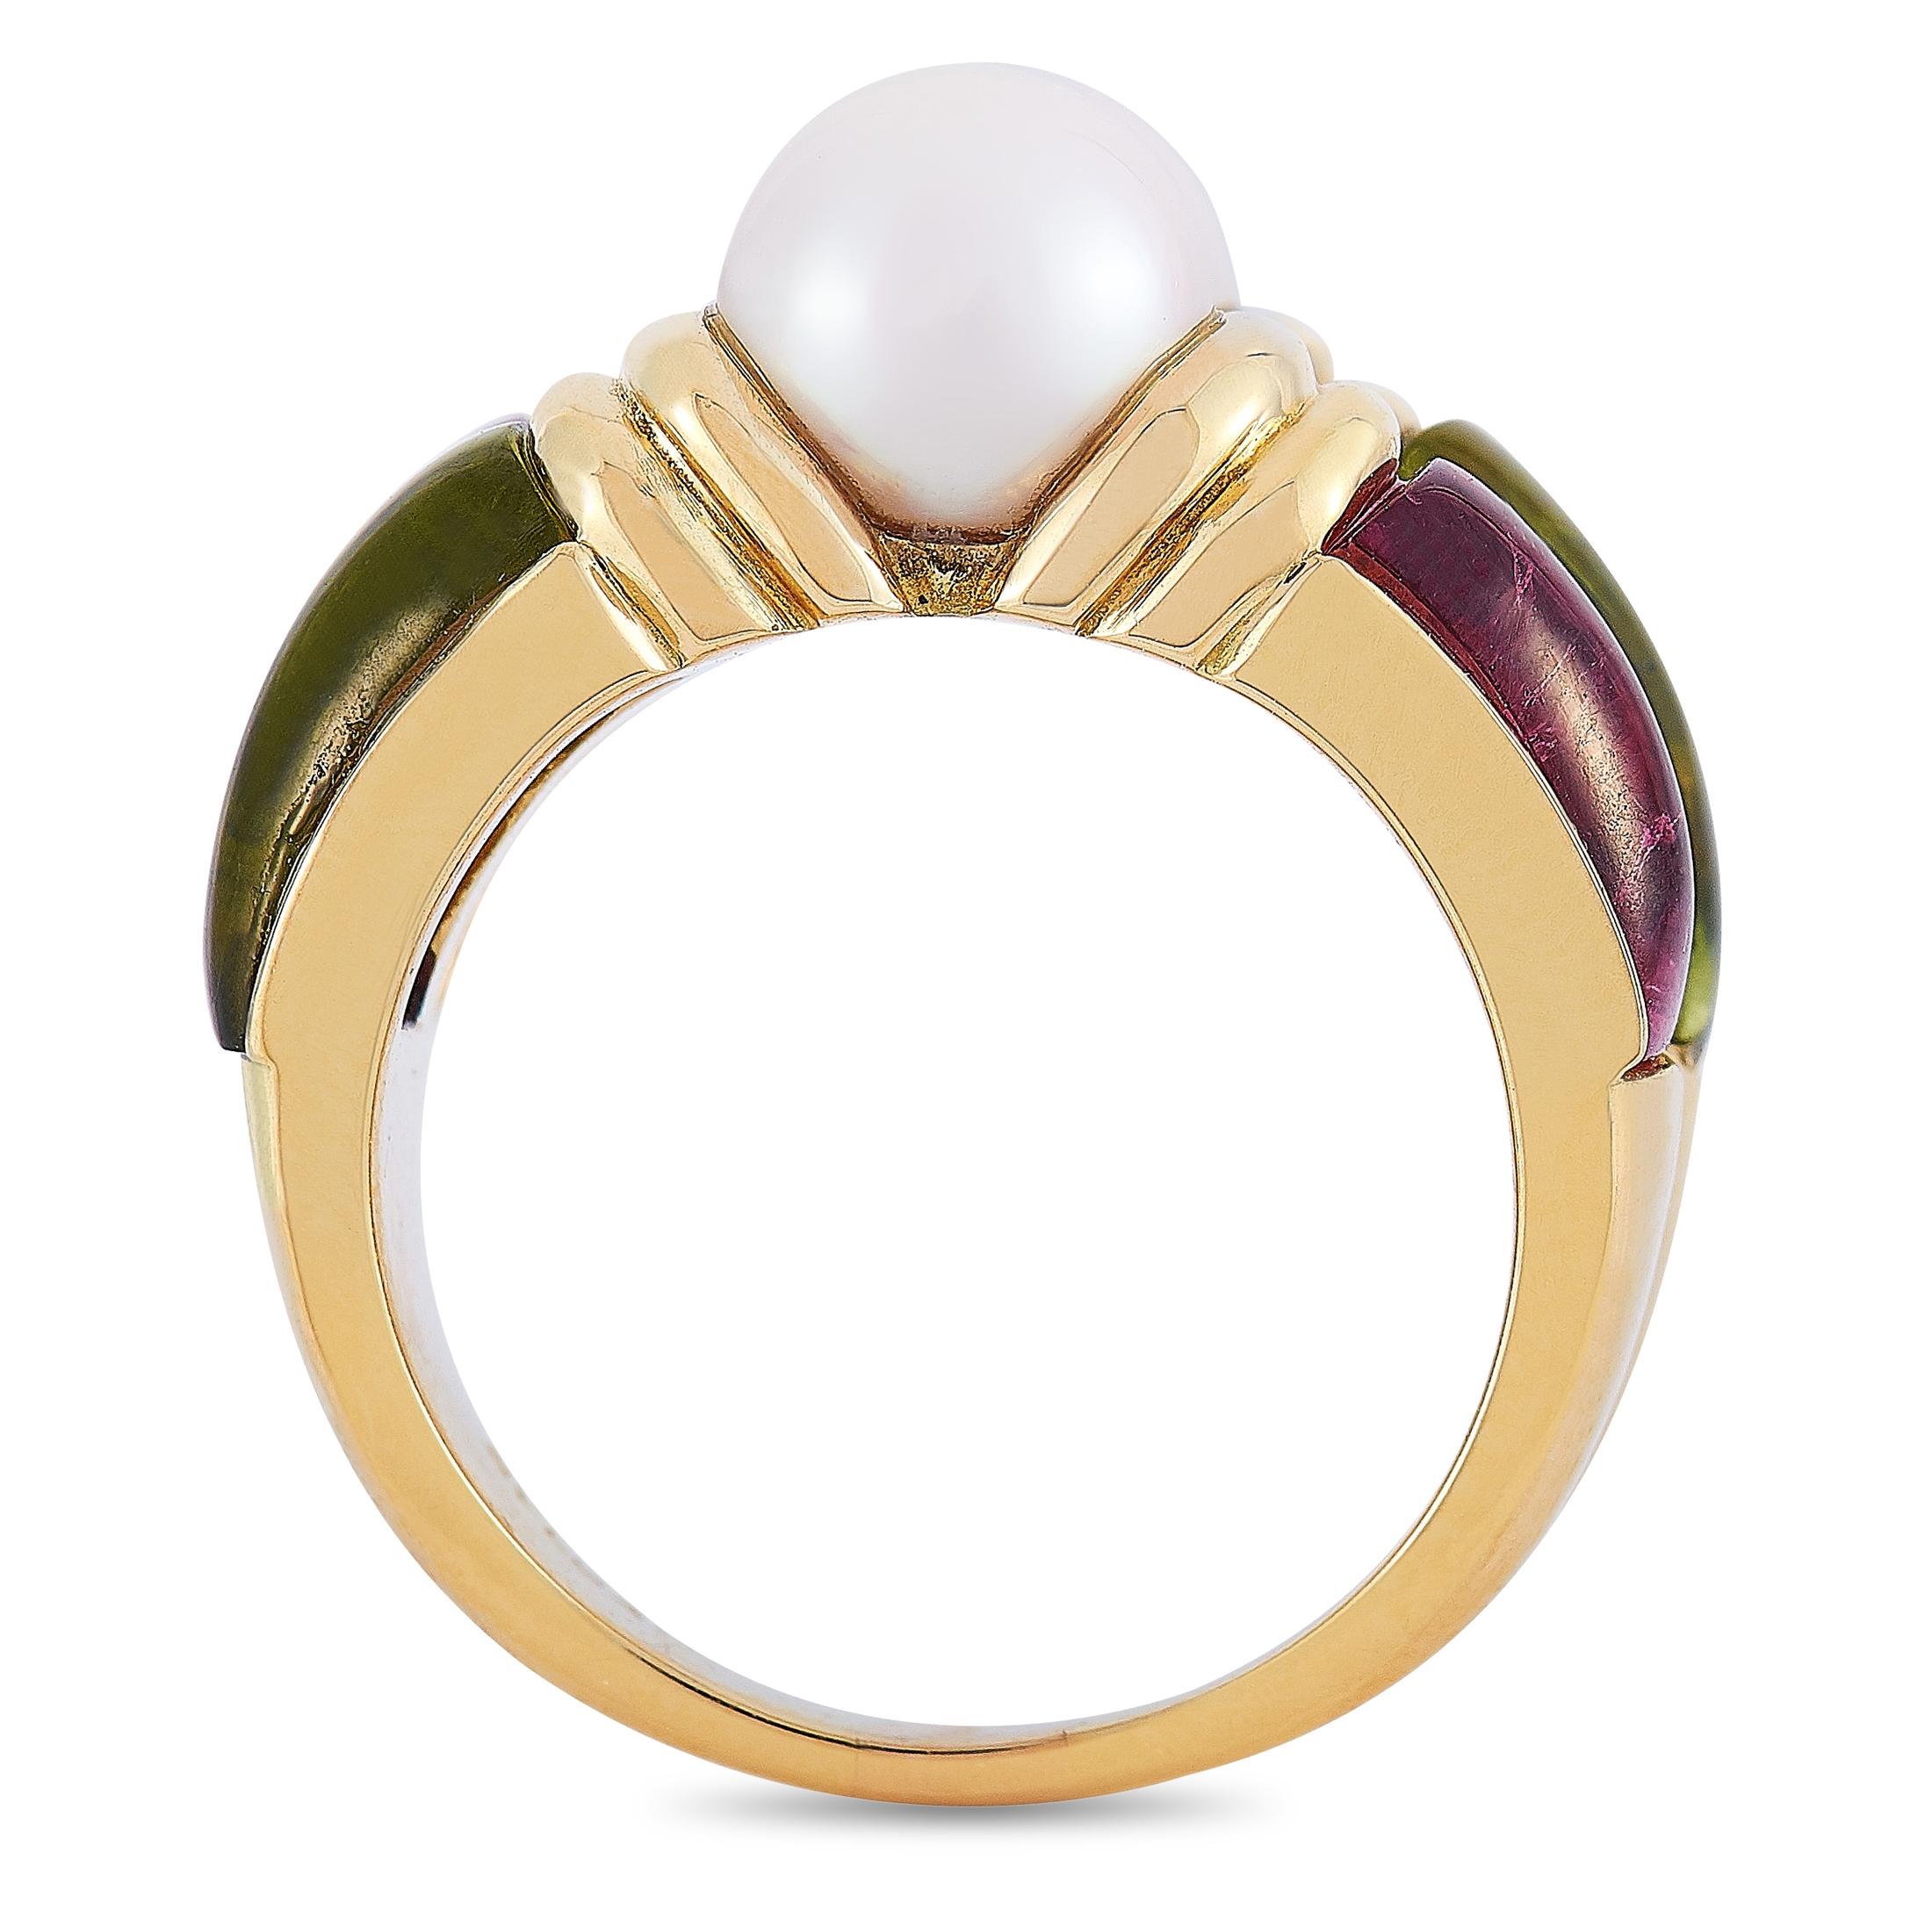 This Bvlgari ring is crafted from 18K yellow gold and weighs 12.8 grams. It boasts band thickness of 3 mm and top height of 7 mm, while top dimensions measure 20 by 13 mm. The ring is set with tourmalines, peridots and pearls.
 
 This item is